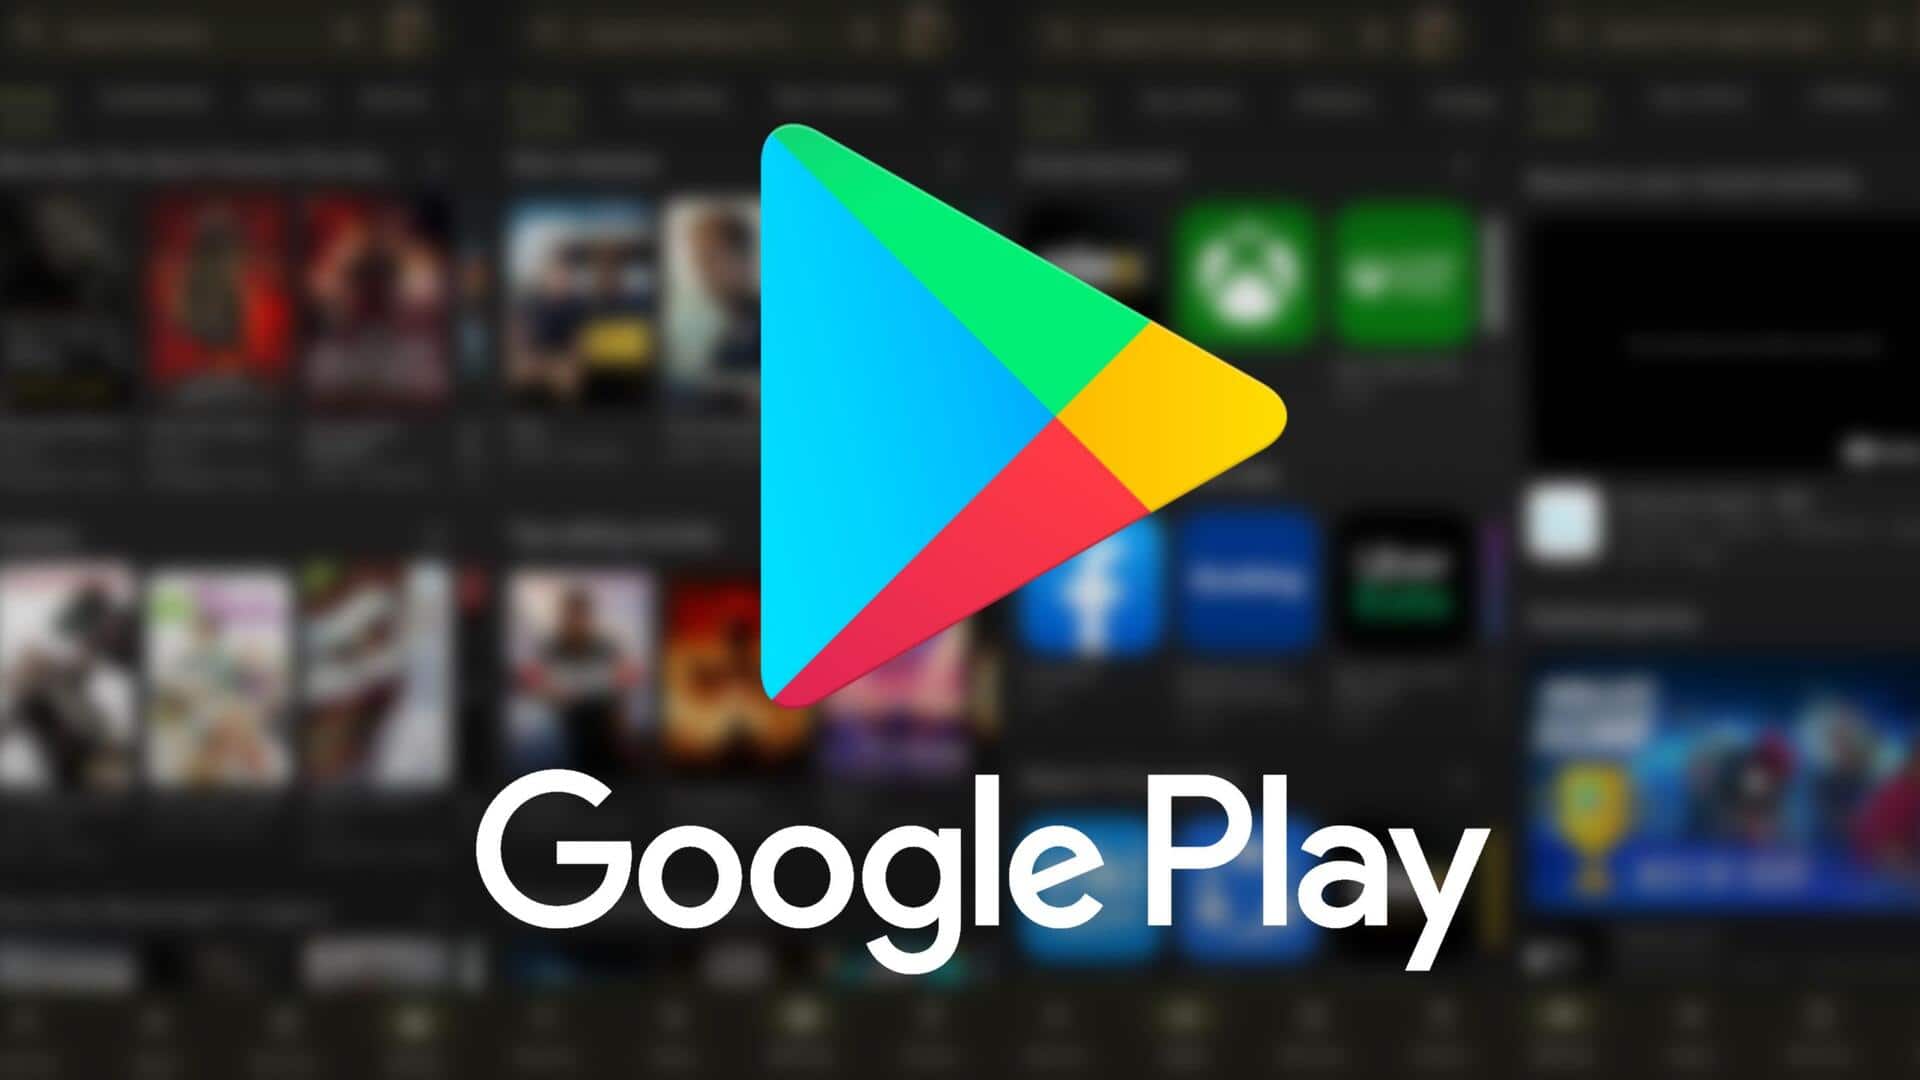 Google Play Store now allows concurrent app downloads, installations